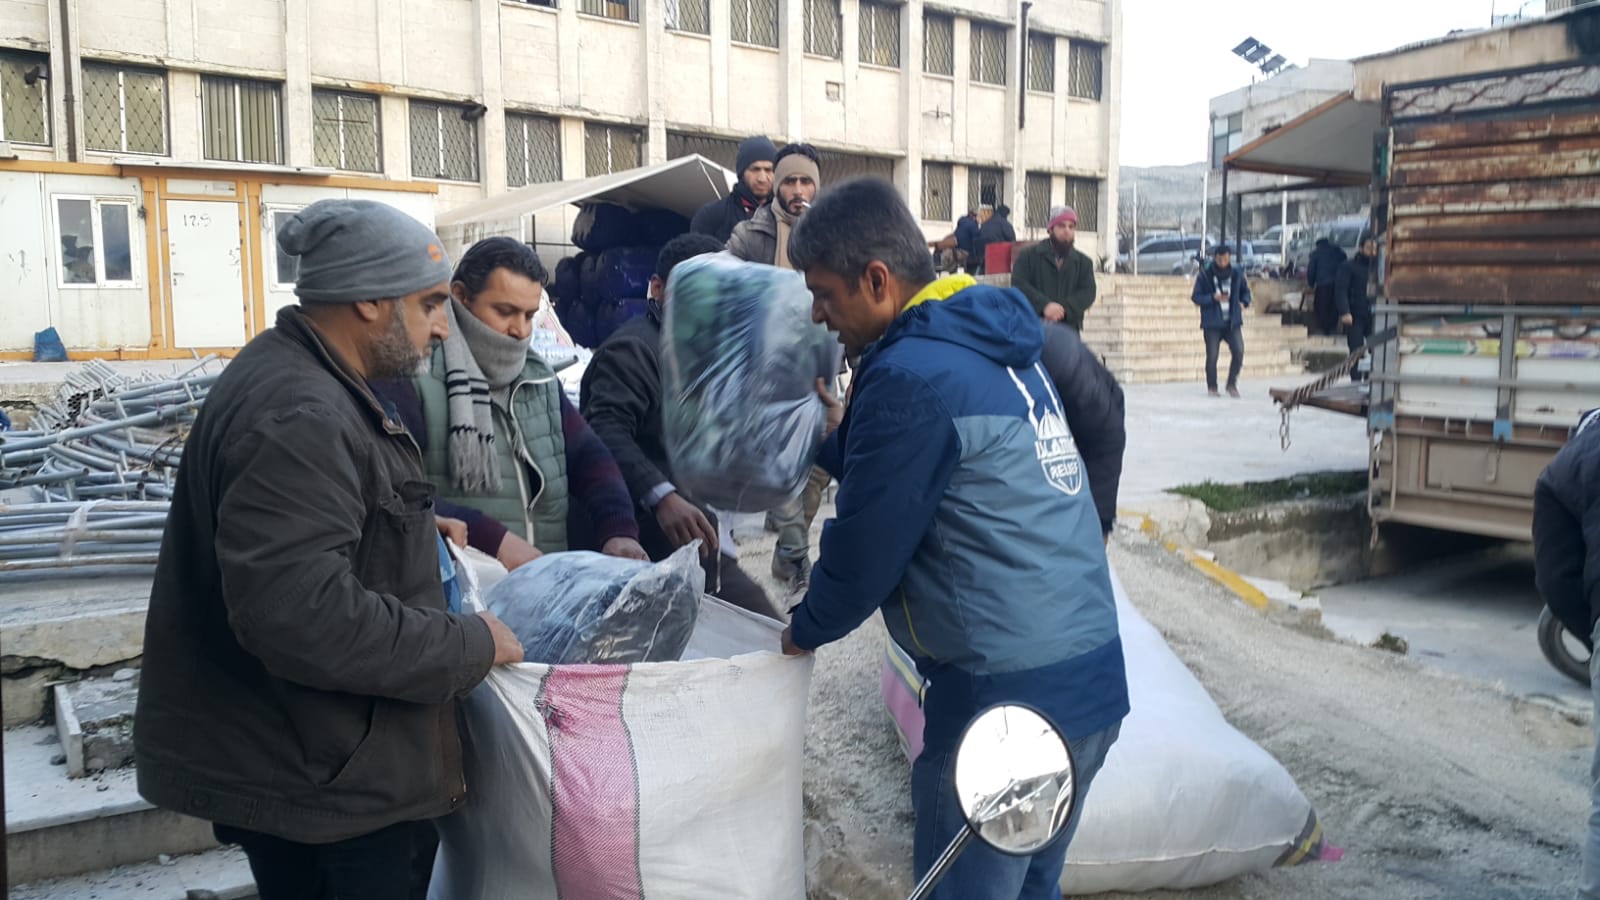 Three men are receiving bags of clothing or blankets at a loading dock in Turkey.